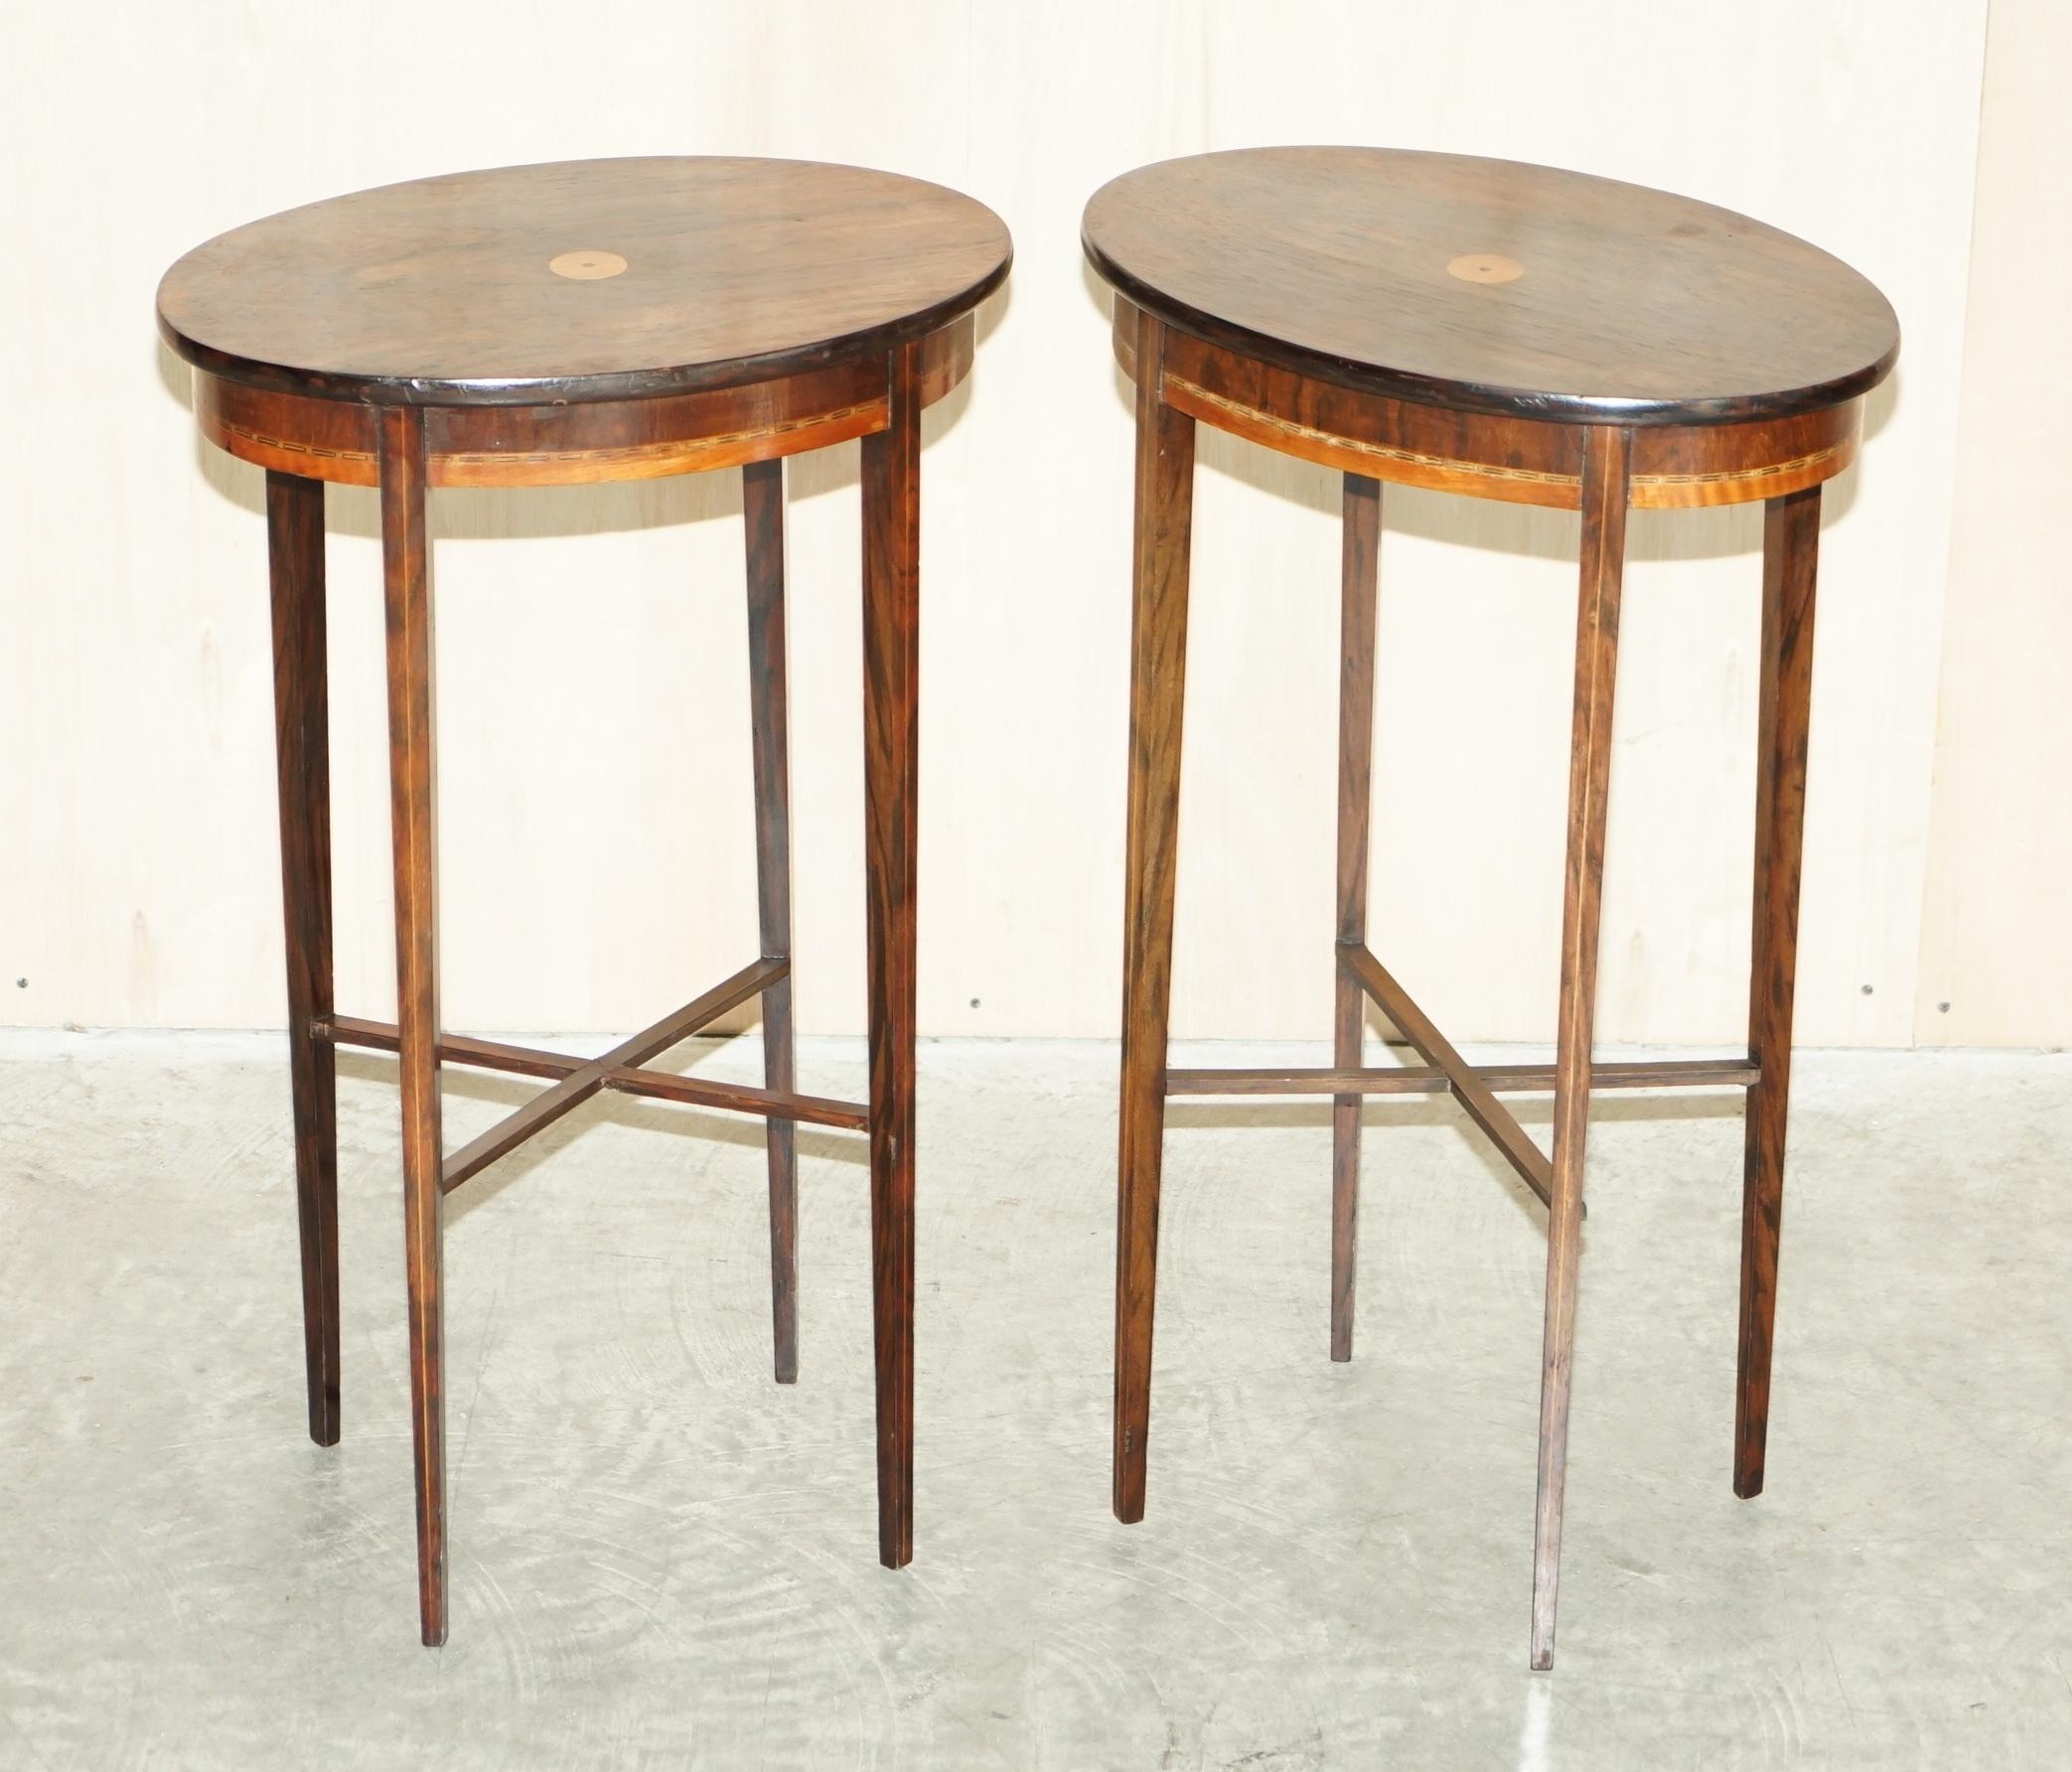 We are delighted to offer this lovely pair of Victorian Rosewood oval lamp tables with lovely walnut and boxwood inlay

A good looking and elegant pair of Victorian tall side tables, ideally suited as art furniture on their own or with a silver